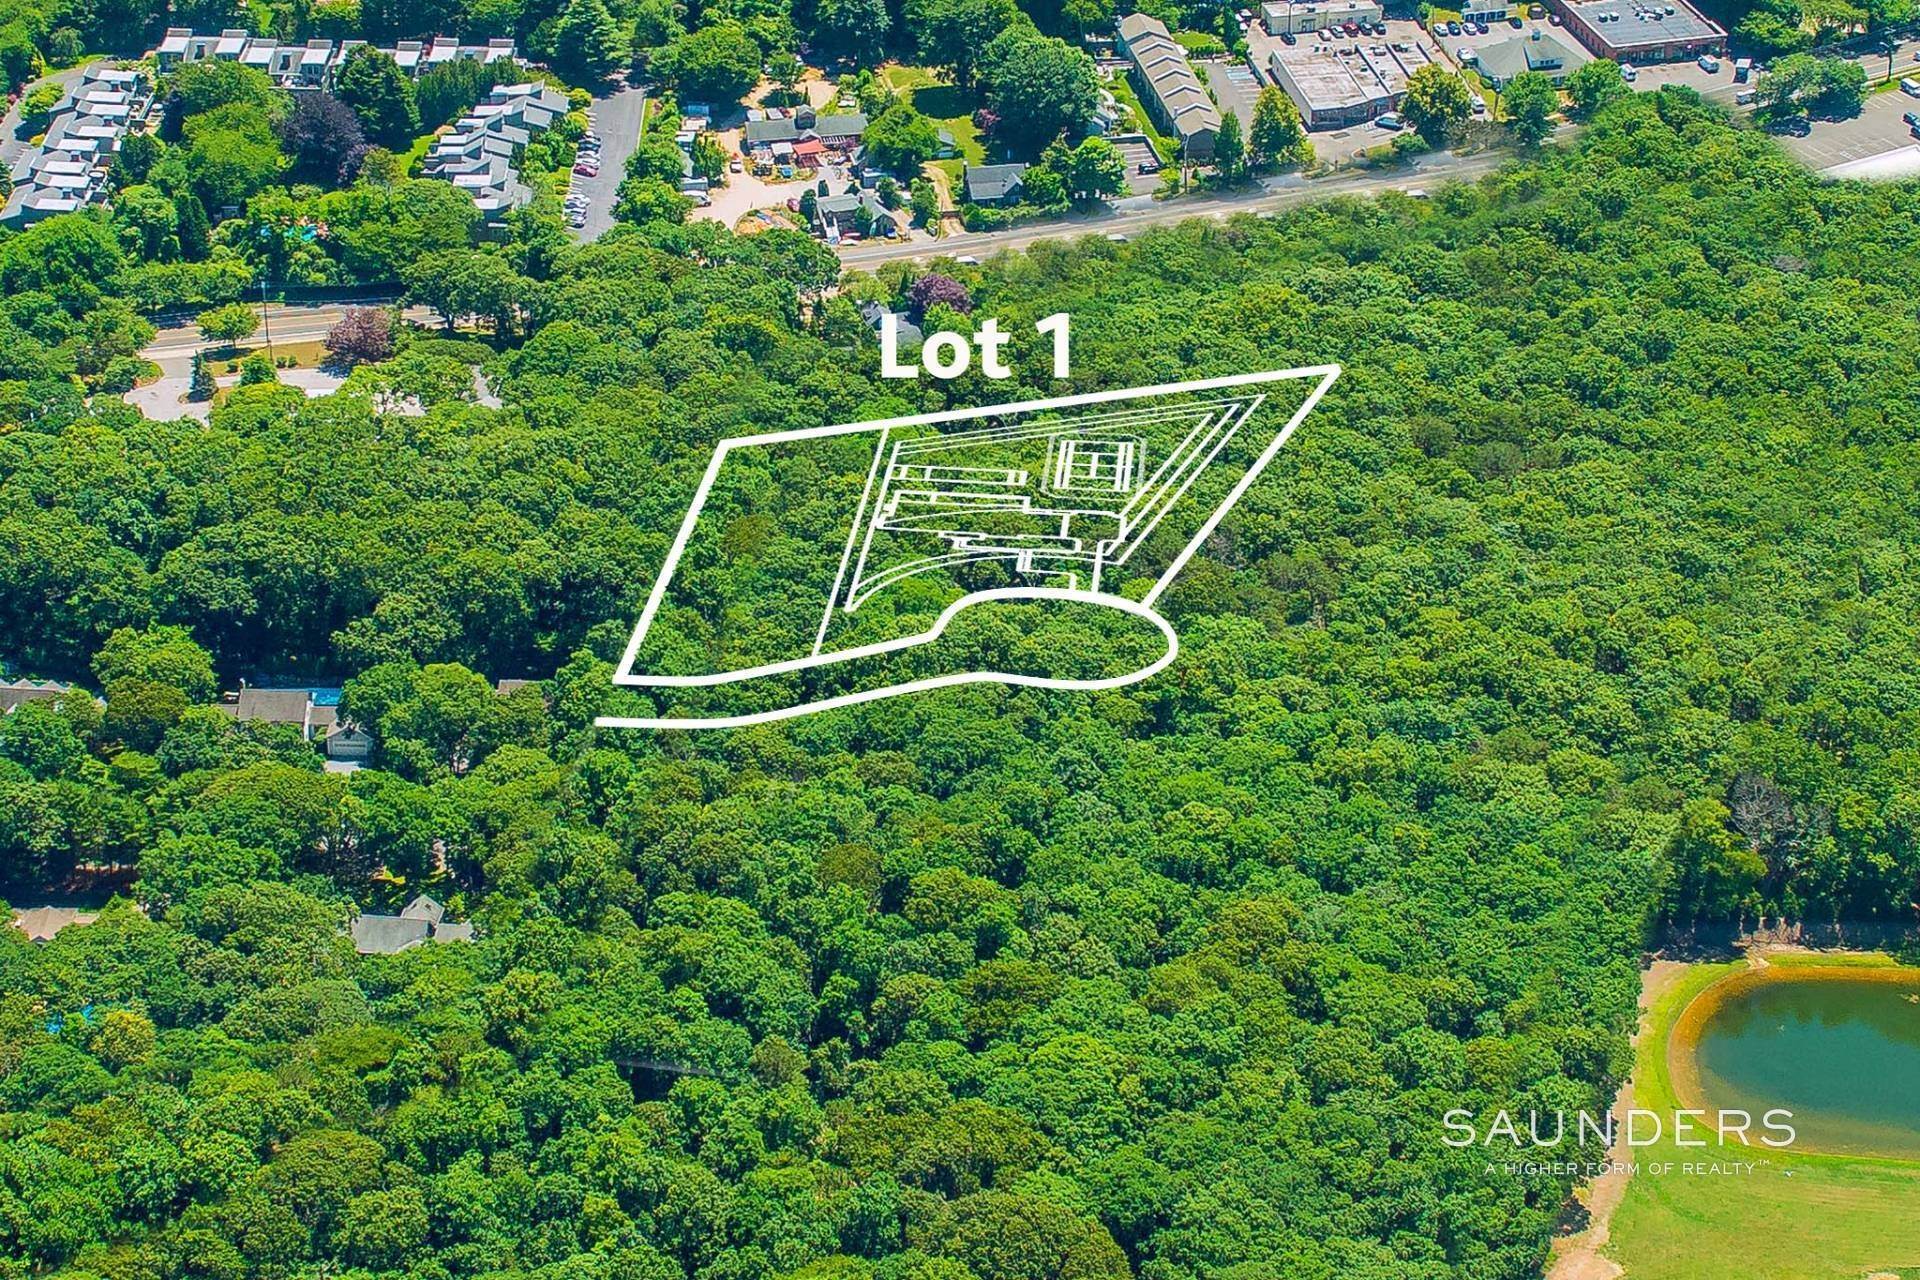 3. Land for Sale at Luxury Development Opportunity Holly Place, Lots 1 - 4, East Hampton, NY 11937